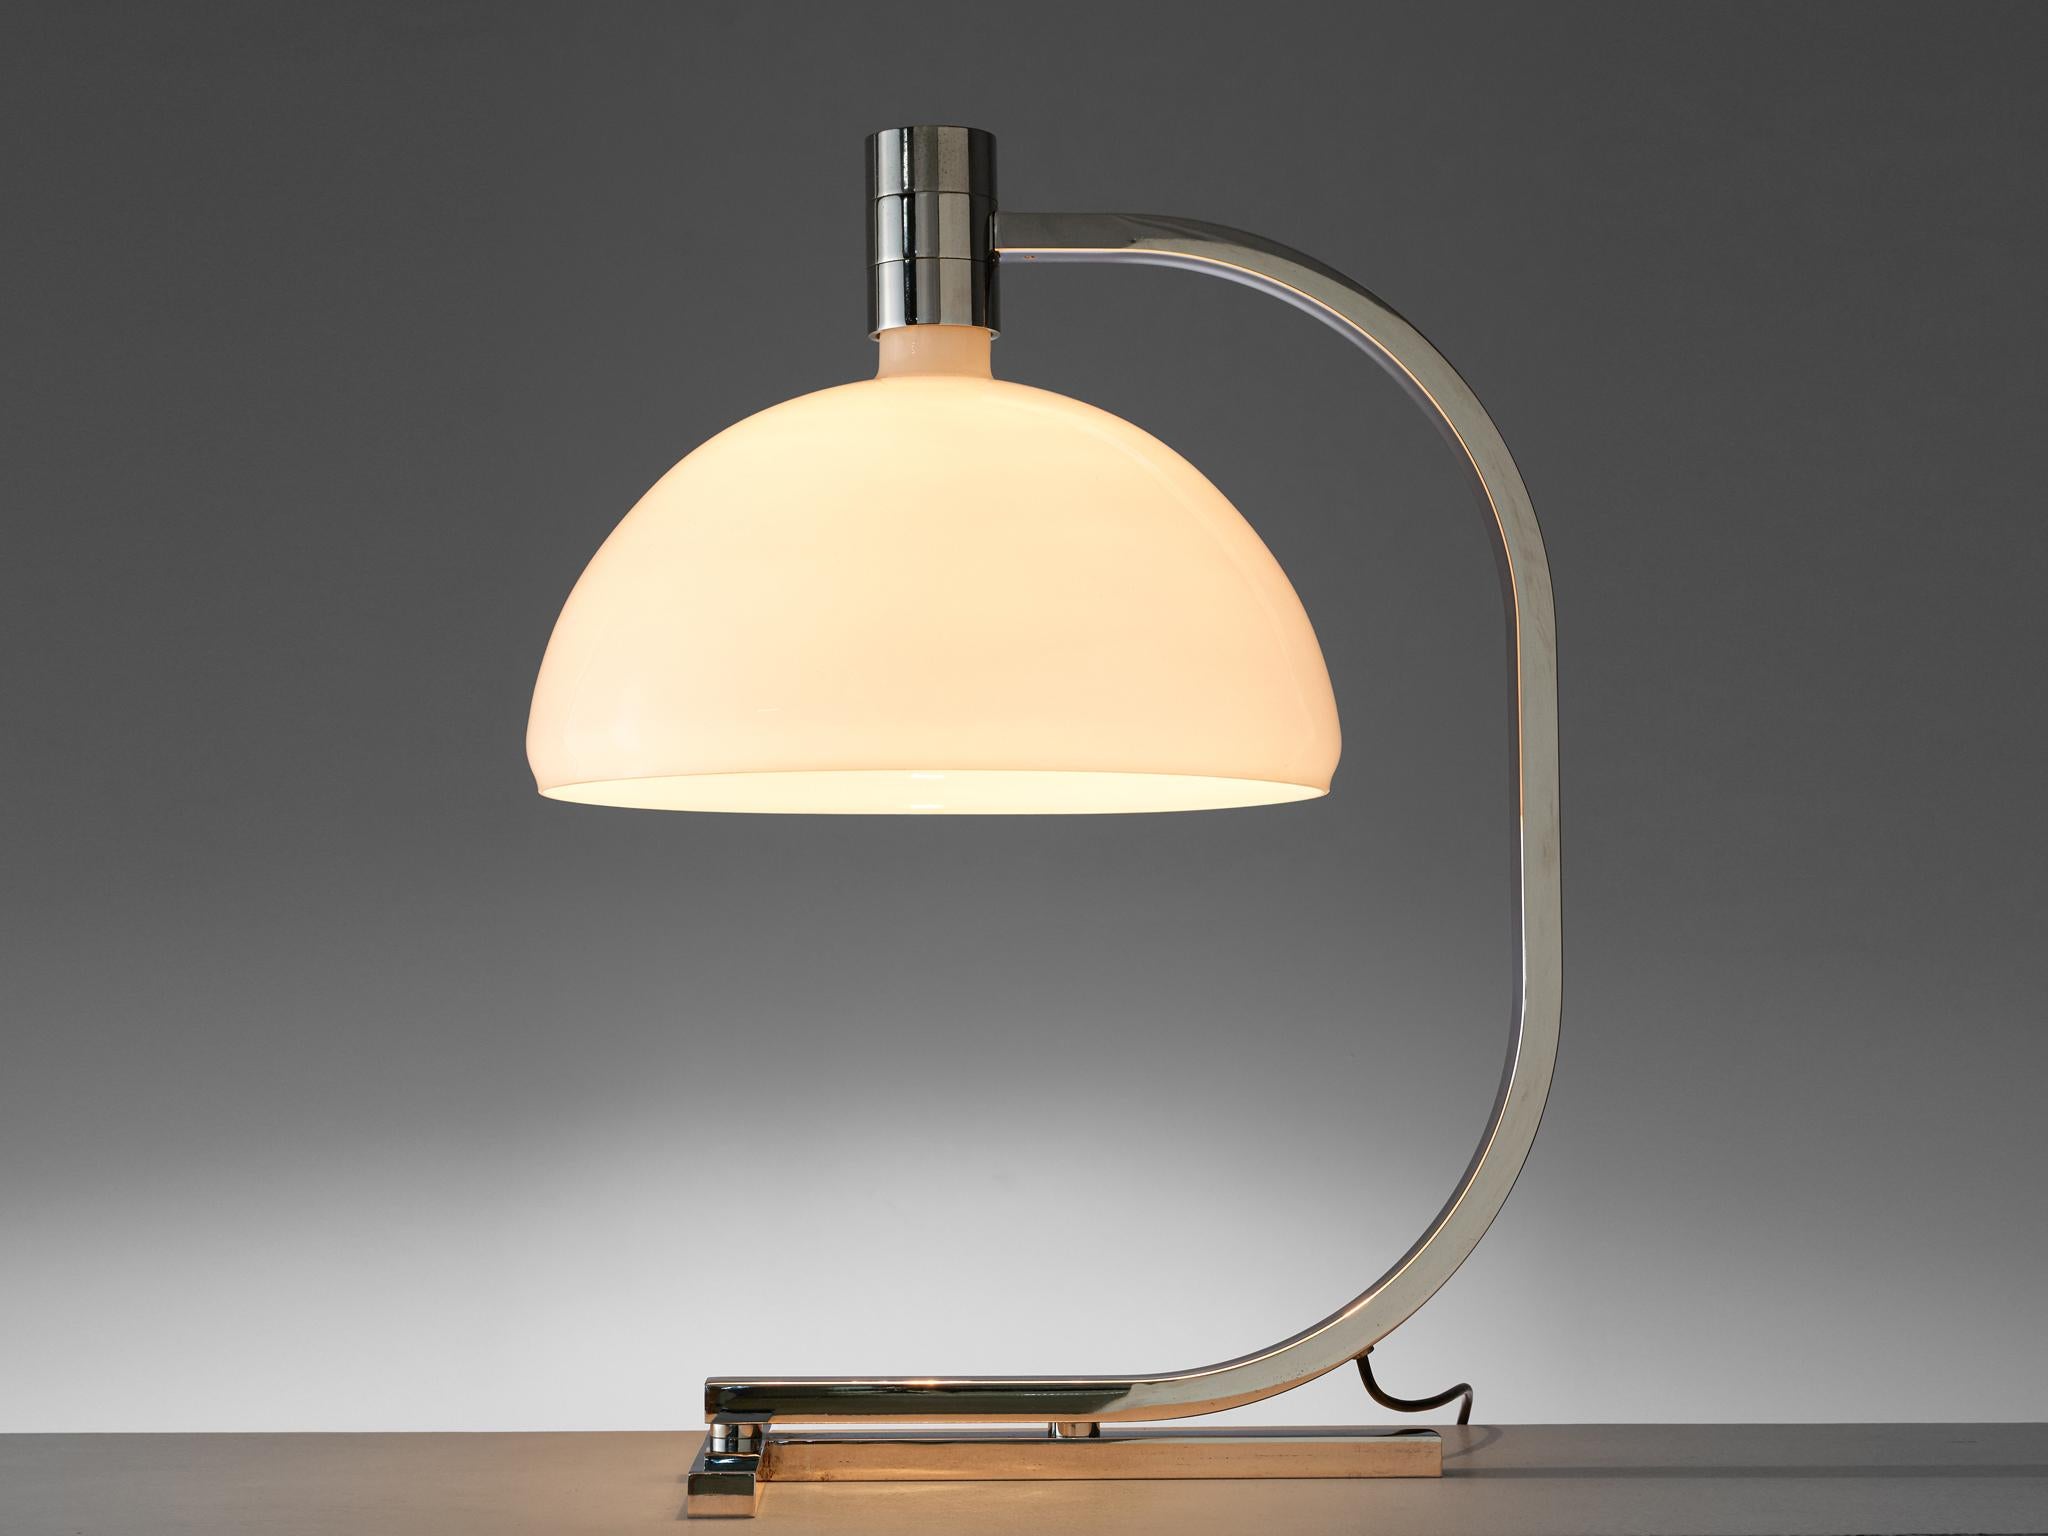 Franco Albini, Franca Helg and Antonio Piva for Sirra, table lamp, glass and chromed steel, Italy, 1969

Italian table lamp by Franco Albini, Franca Helg and Antonio Piva, produced by Sirrah in 1969. This desk light is composed with a chromed